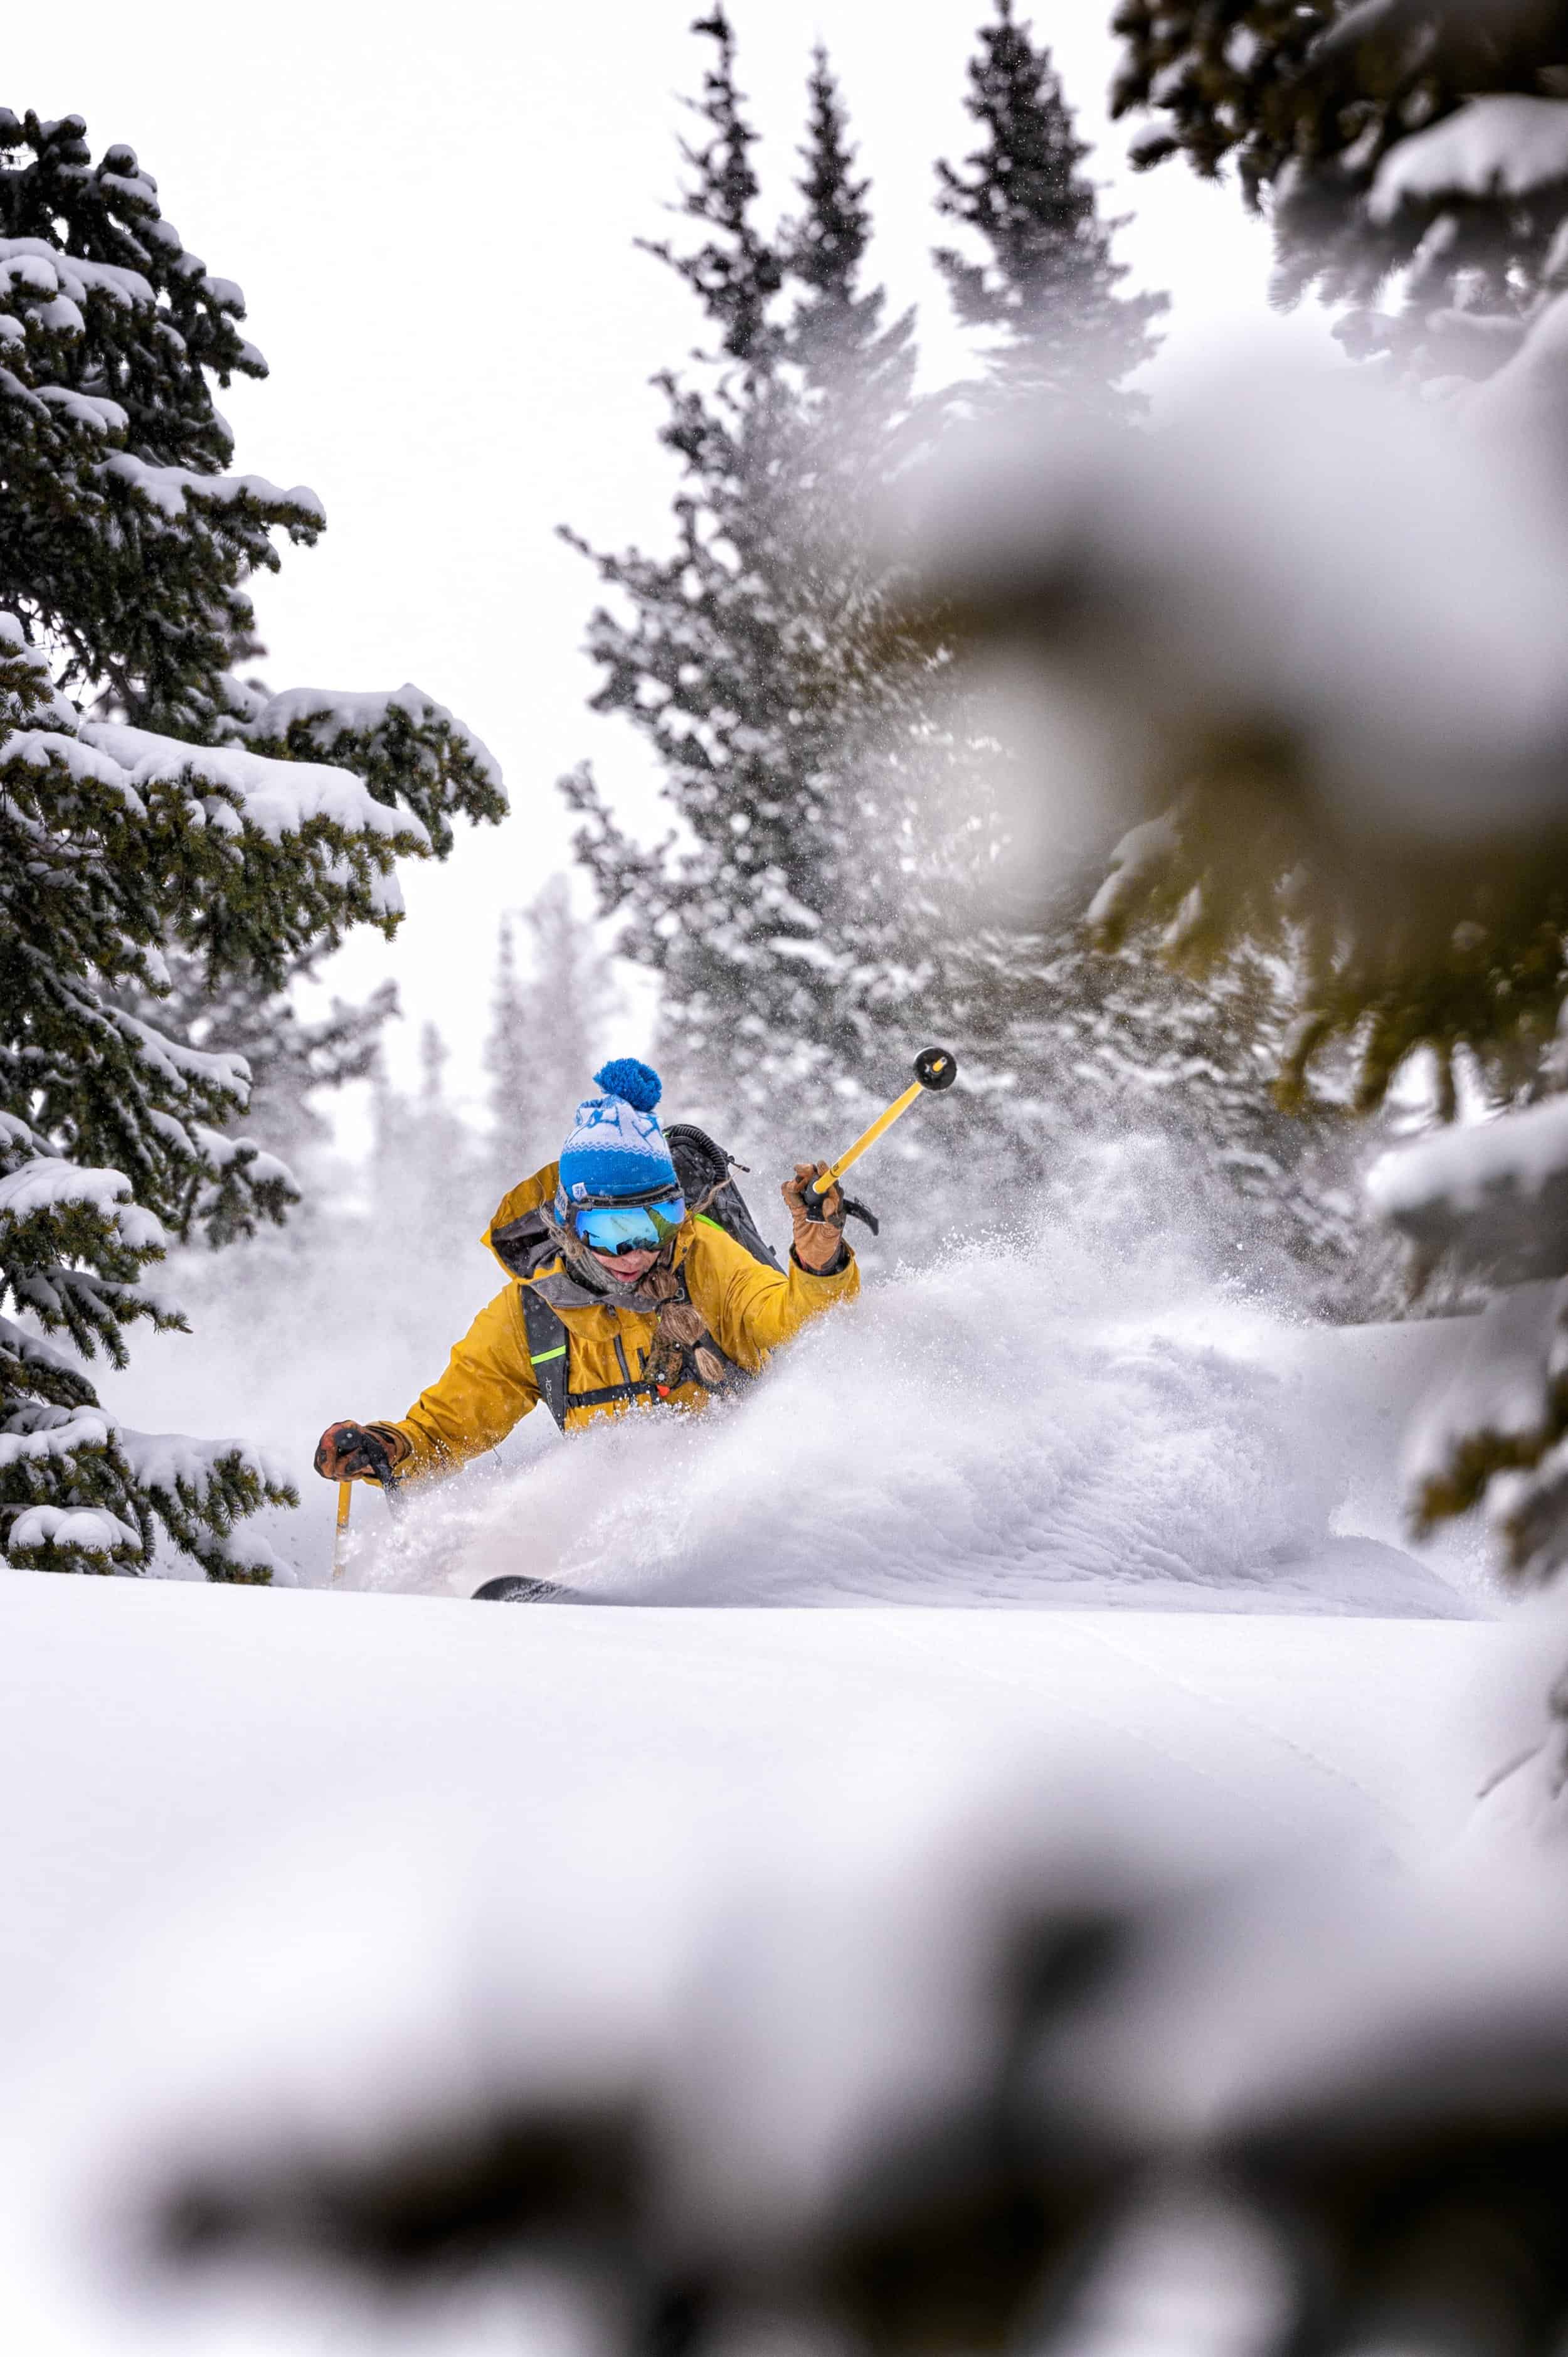 Skier carves turns in powder wearing yellow parka and blue beanie